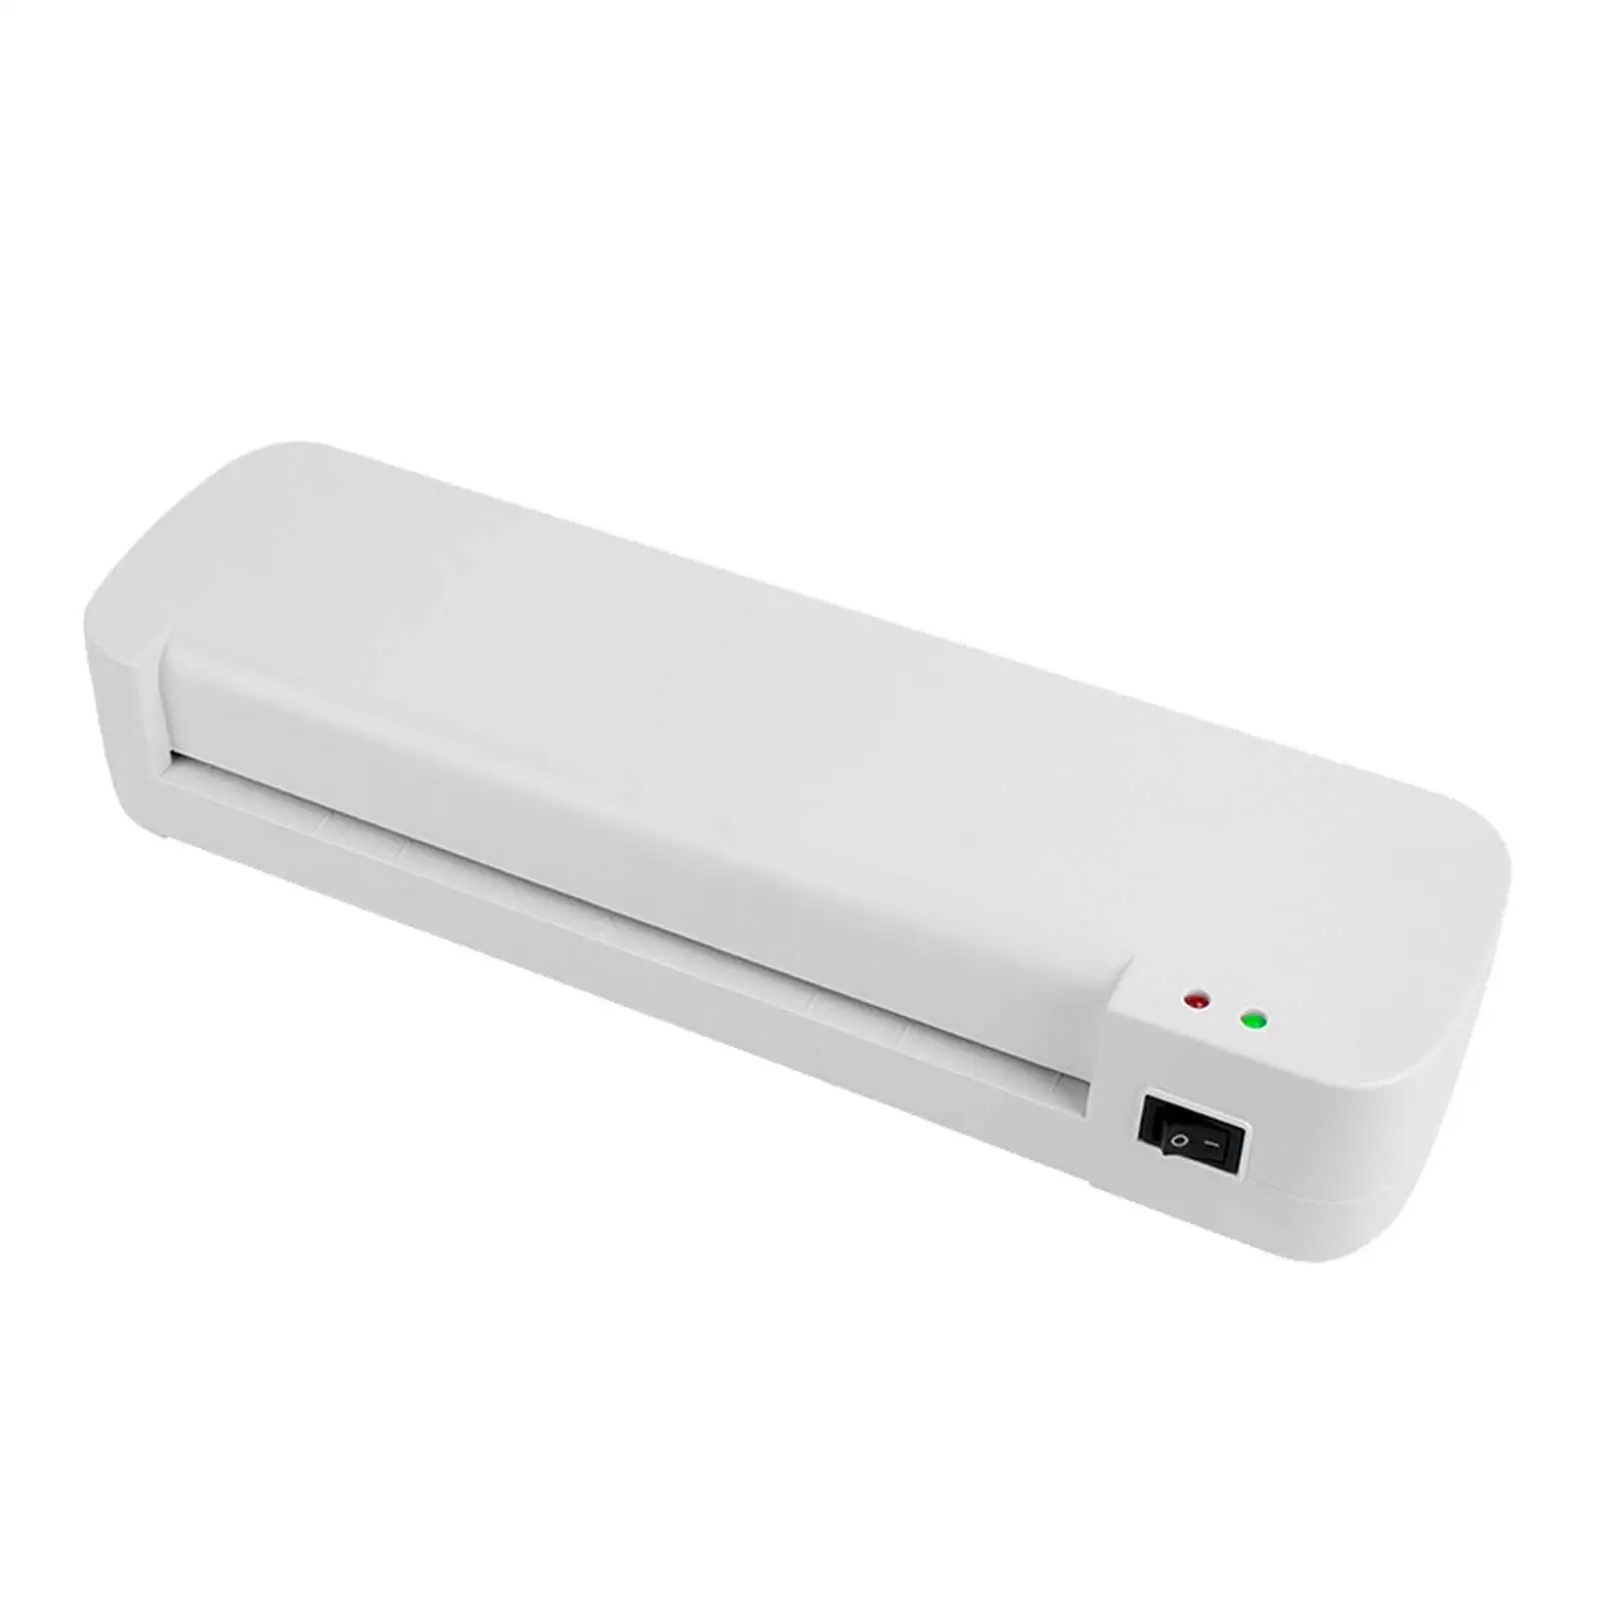 A4 Laminator Portable 3-5 Minutes Warm up Lamination Machine Personal Laminator for Household Home School Sealing Photo Office